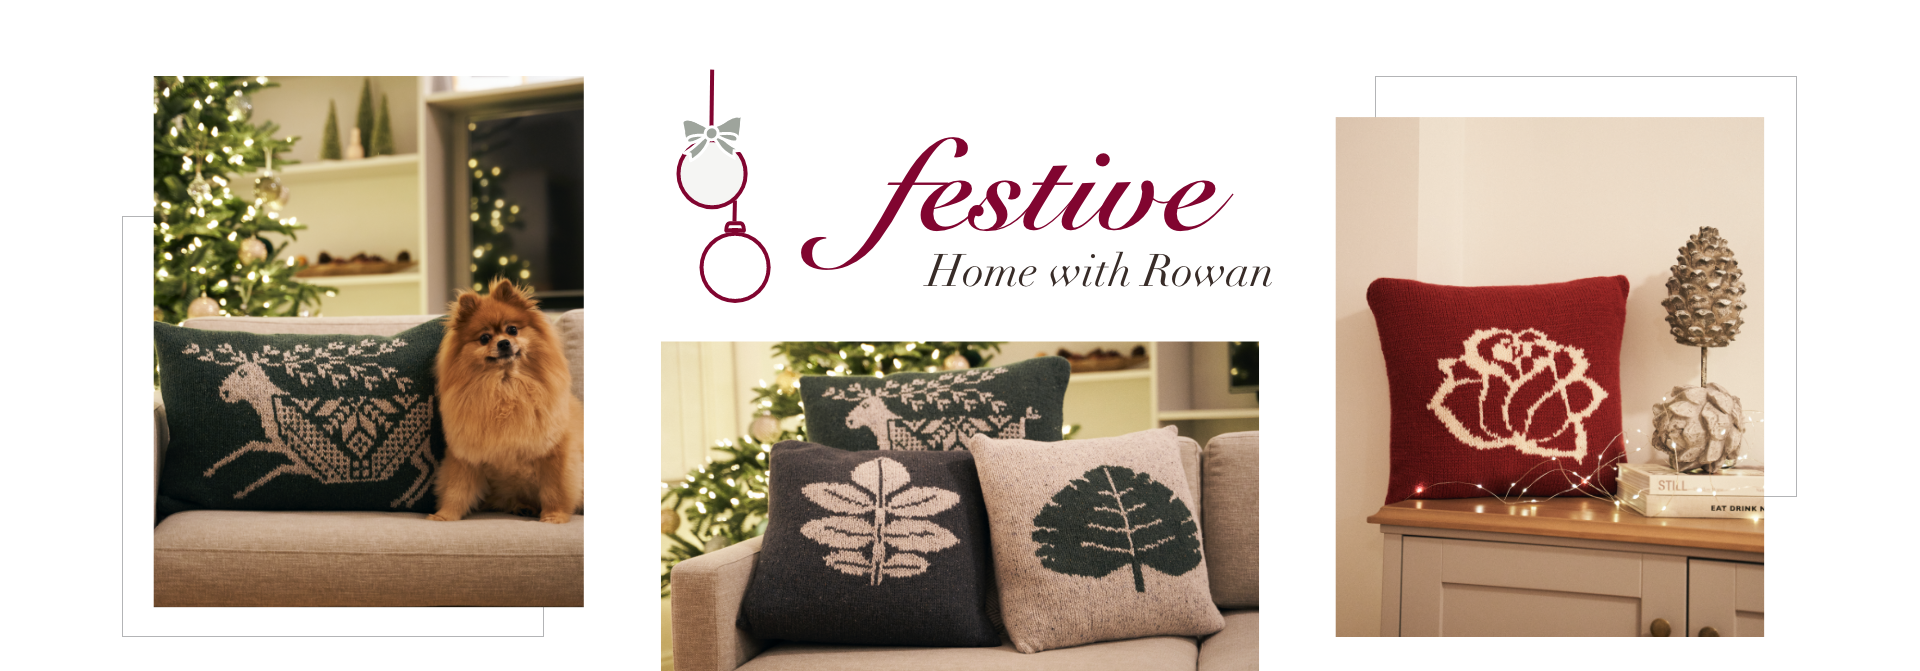 Campaign Festive Home with Rowan Banner